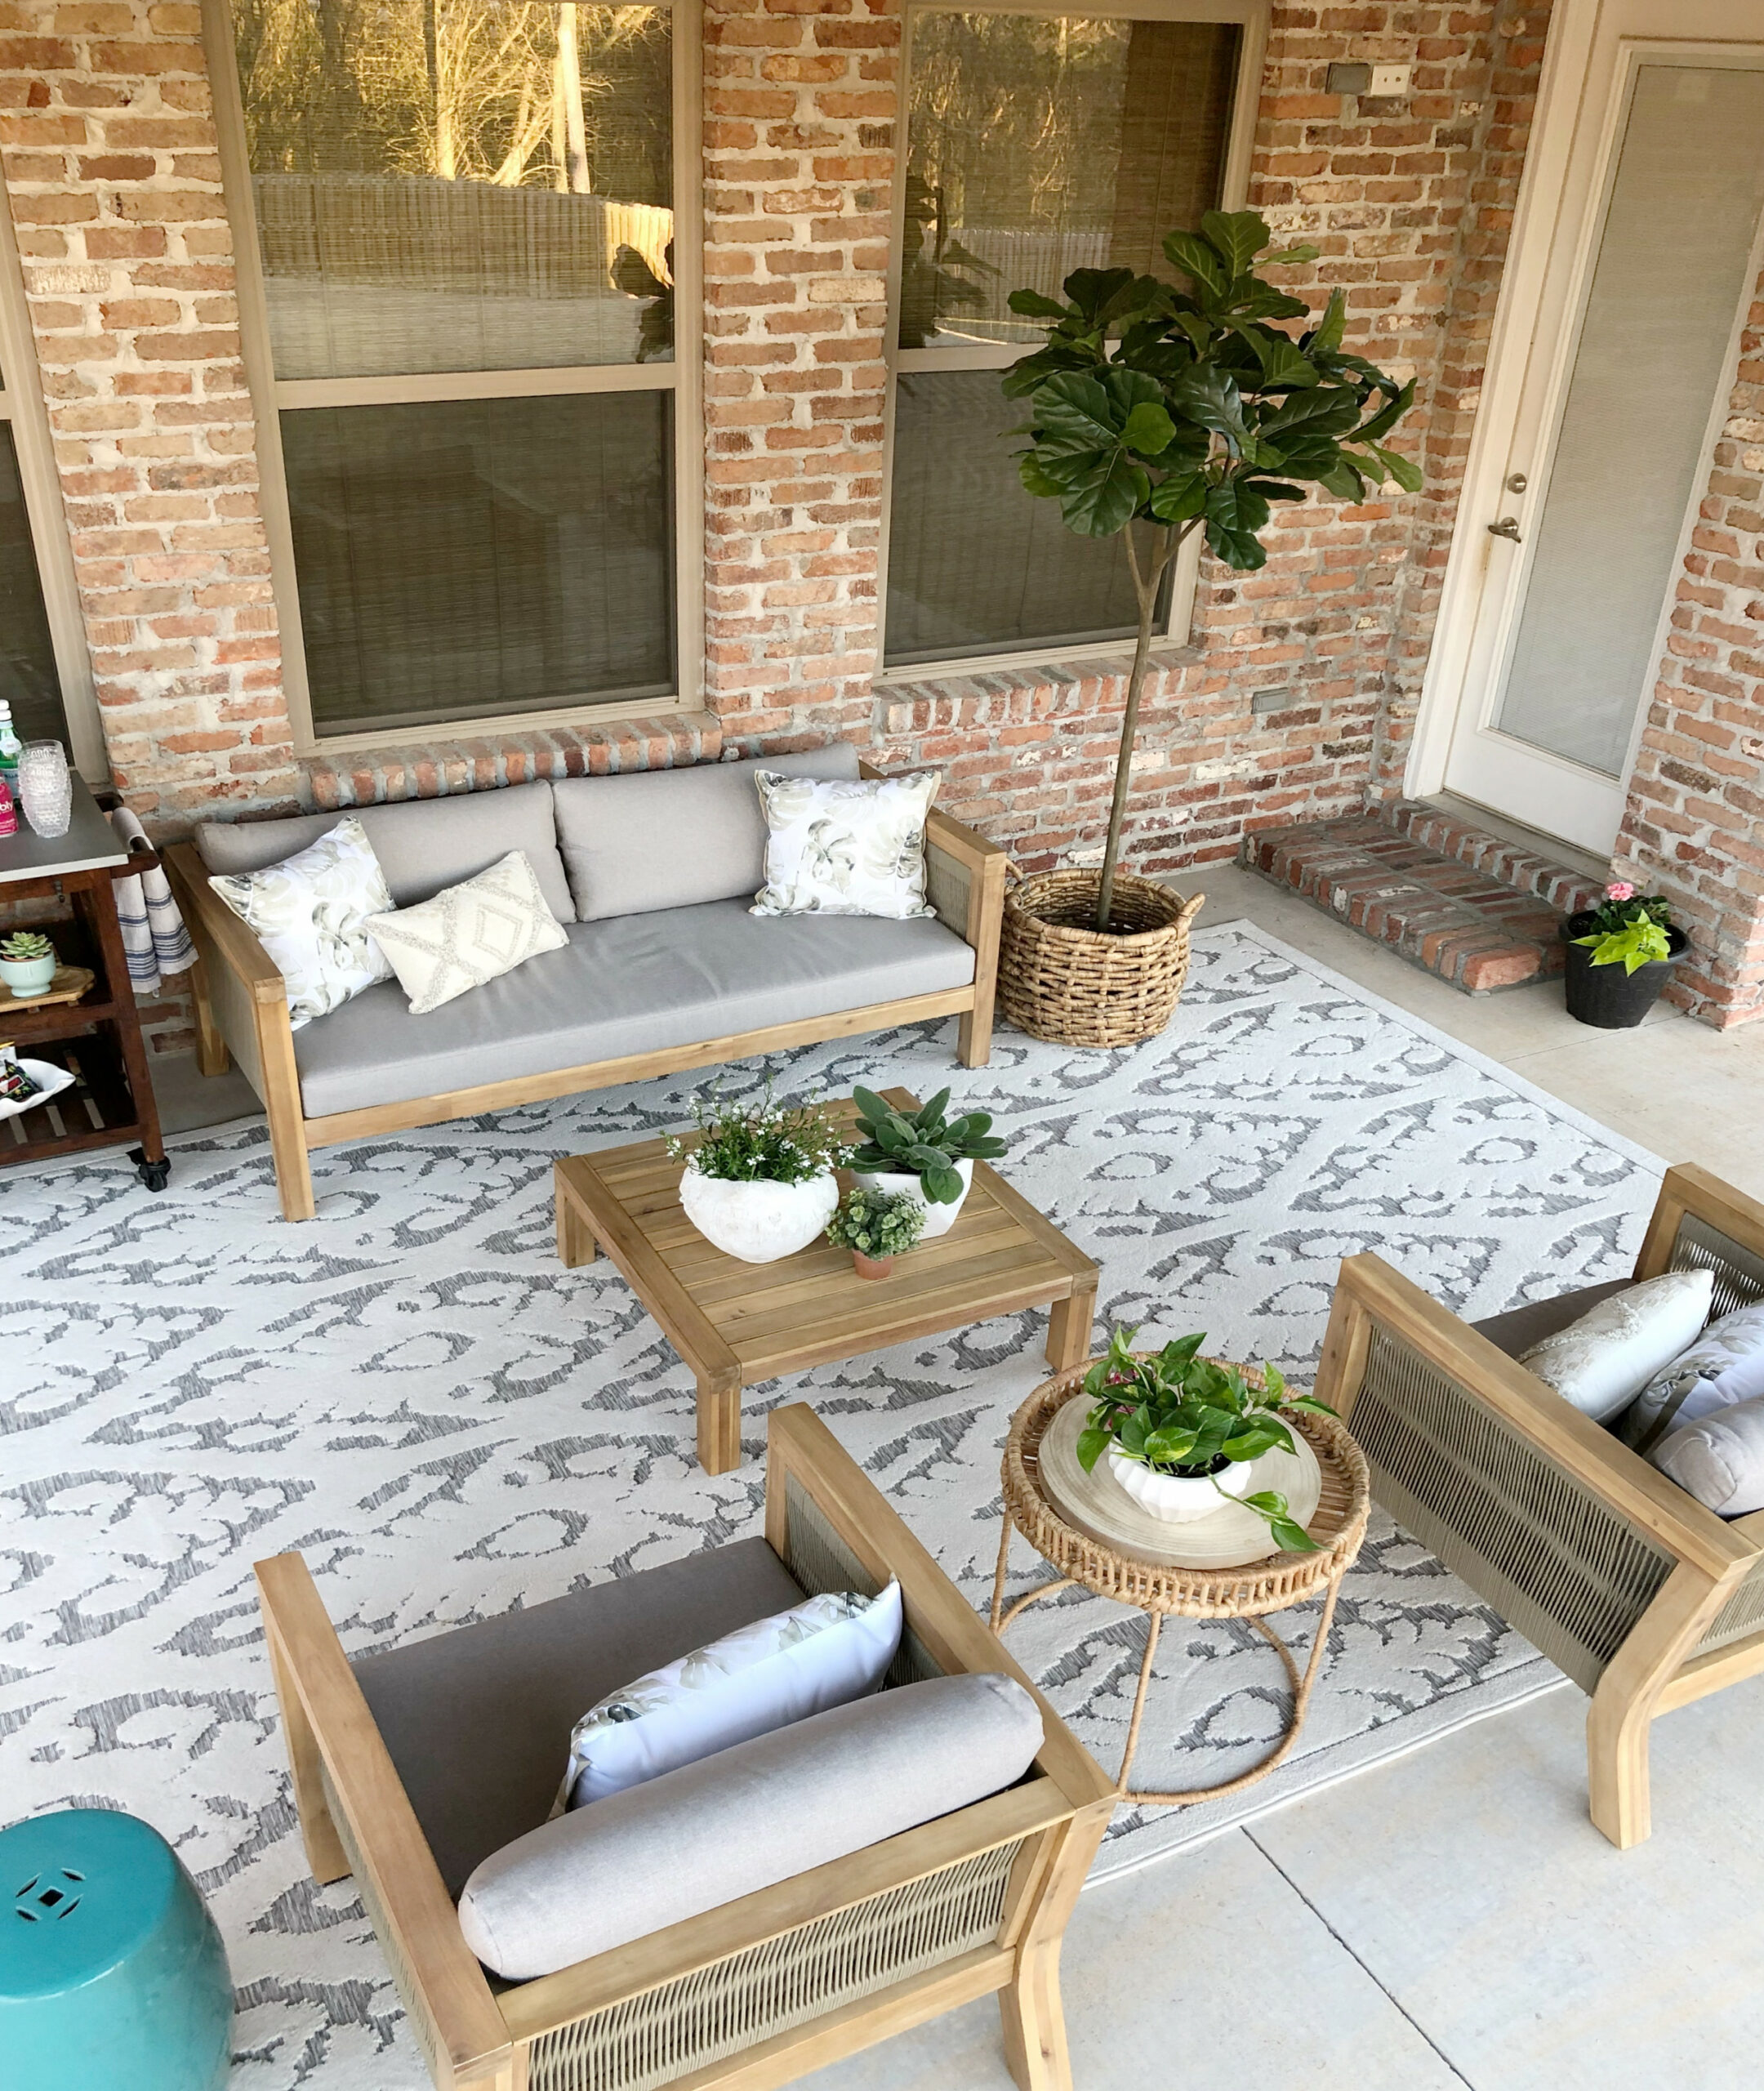 Creating an Outdoor Living Space with At Home - Our Vintage Nest